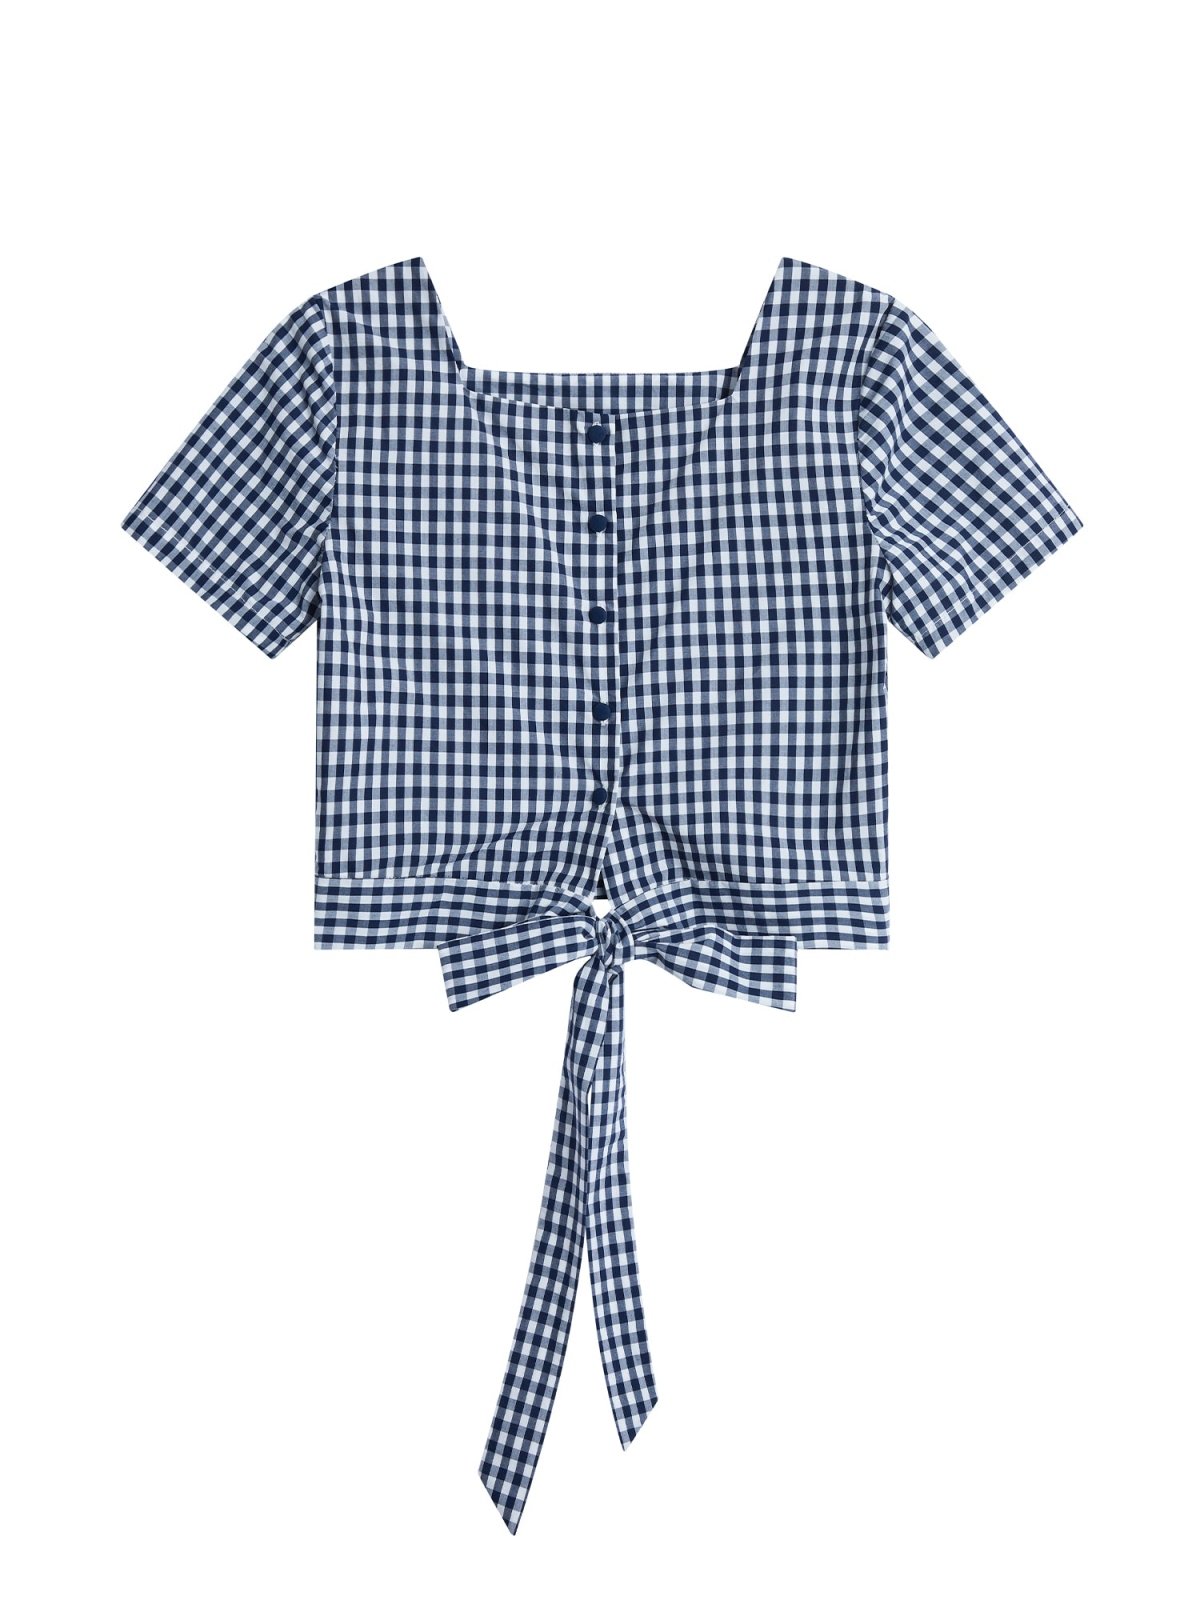 Alise Checkered Two-Way Top Navy - DAG-DD8657-21ClassicNavyS - Blue White Checkers - S - D'ZAGE Designs